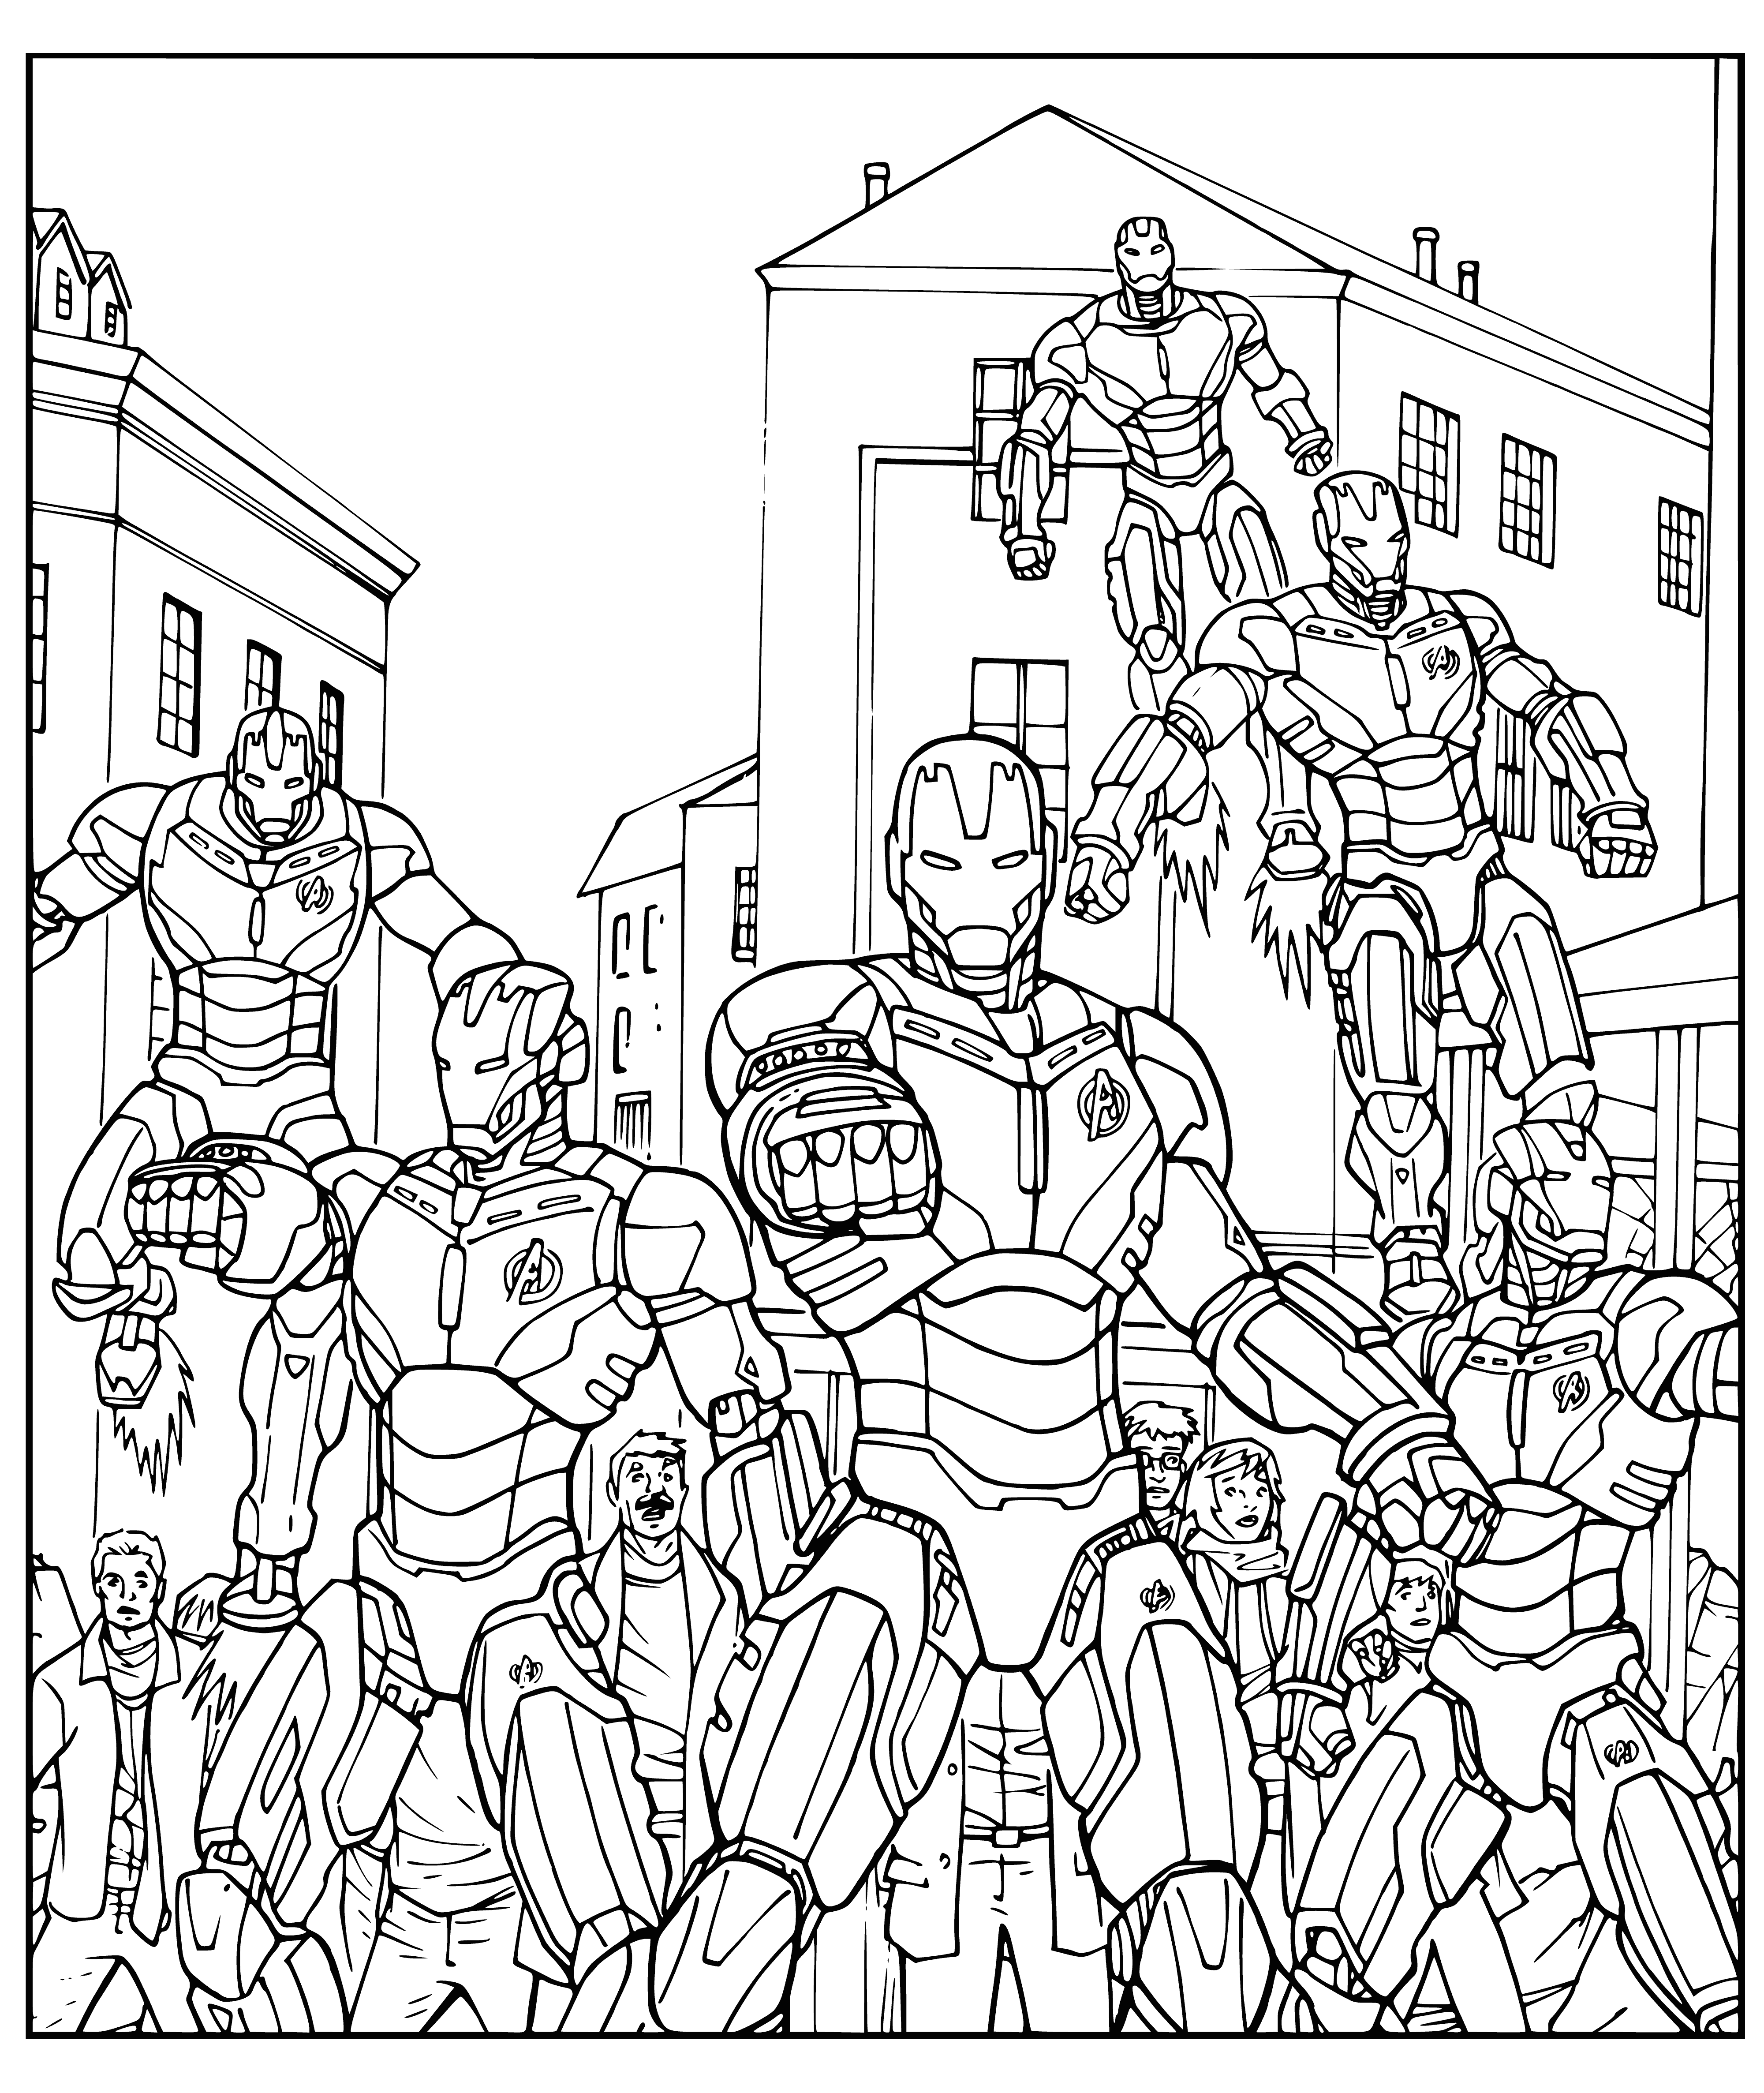 coloring page: Robot army led by Ultron marches towards a city in a bright orange sky. Guns in tow.